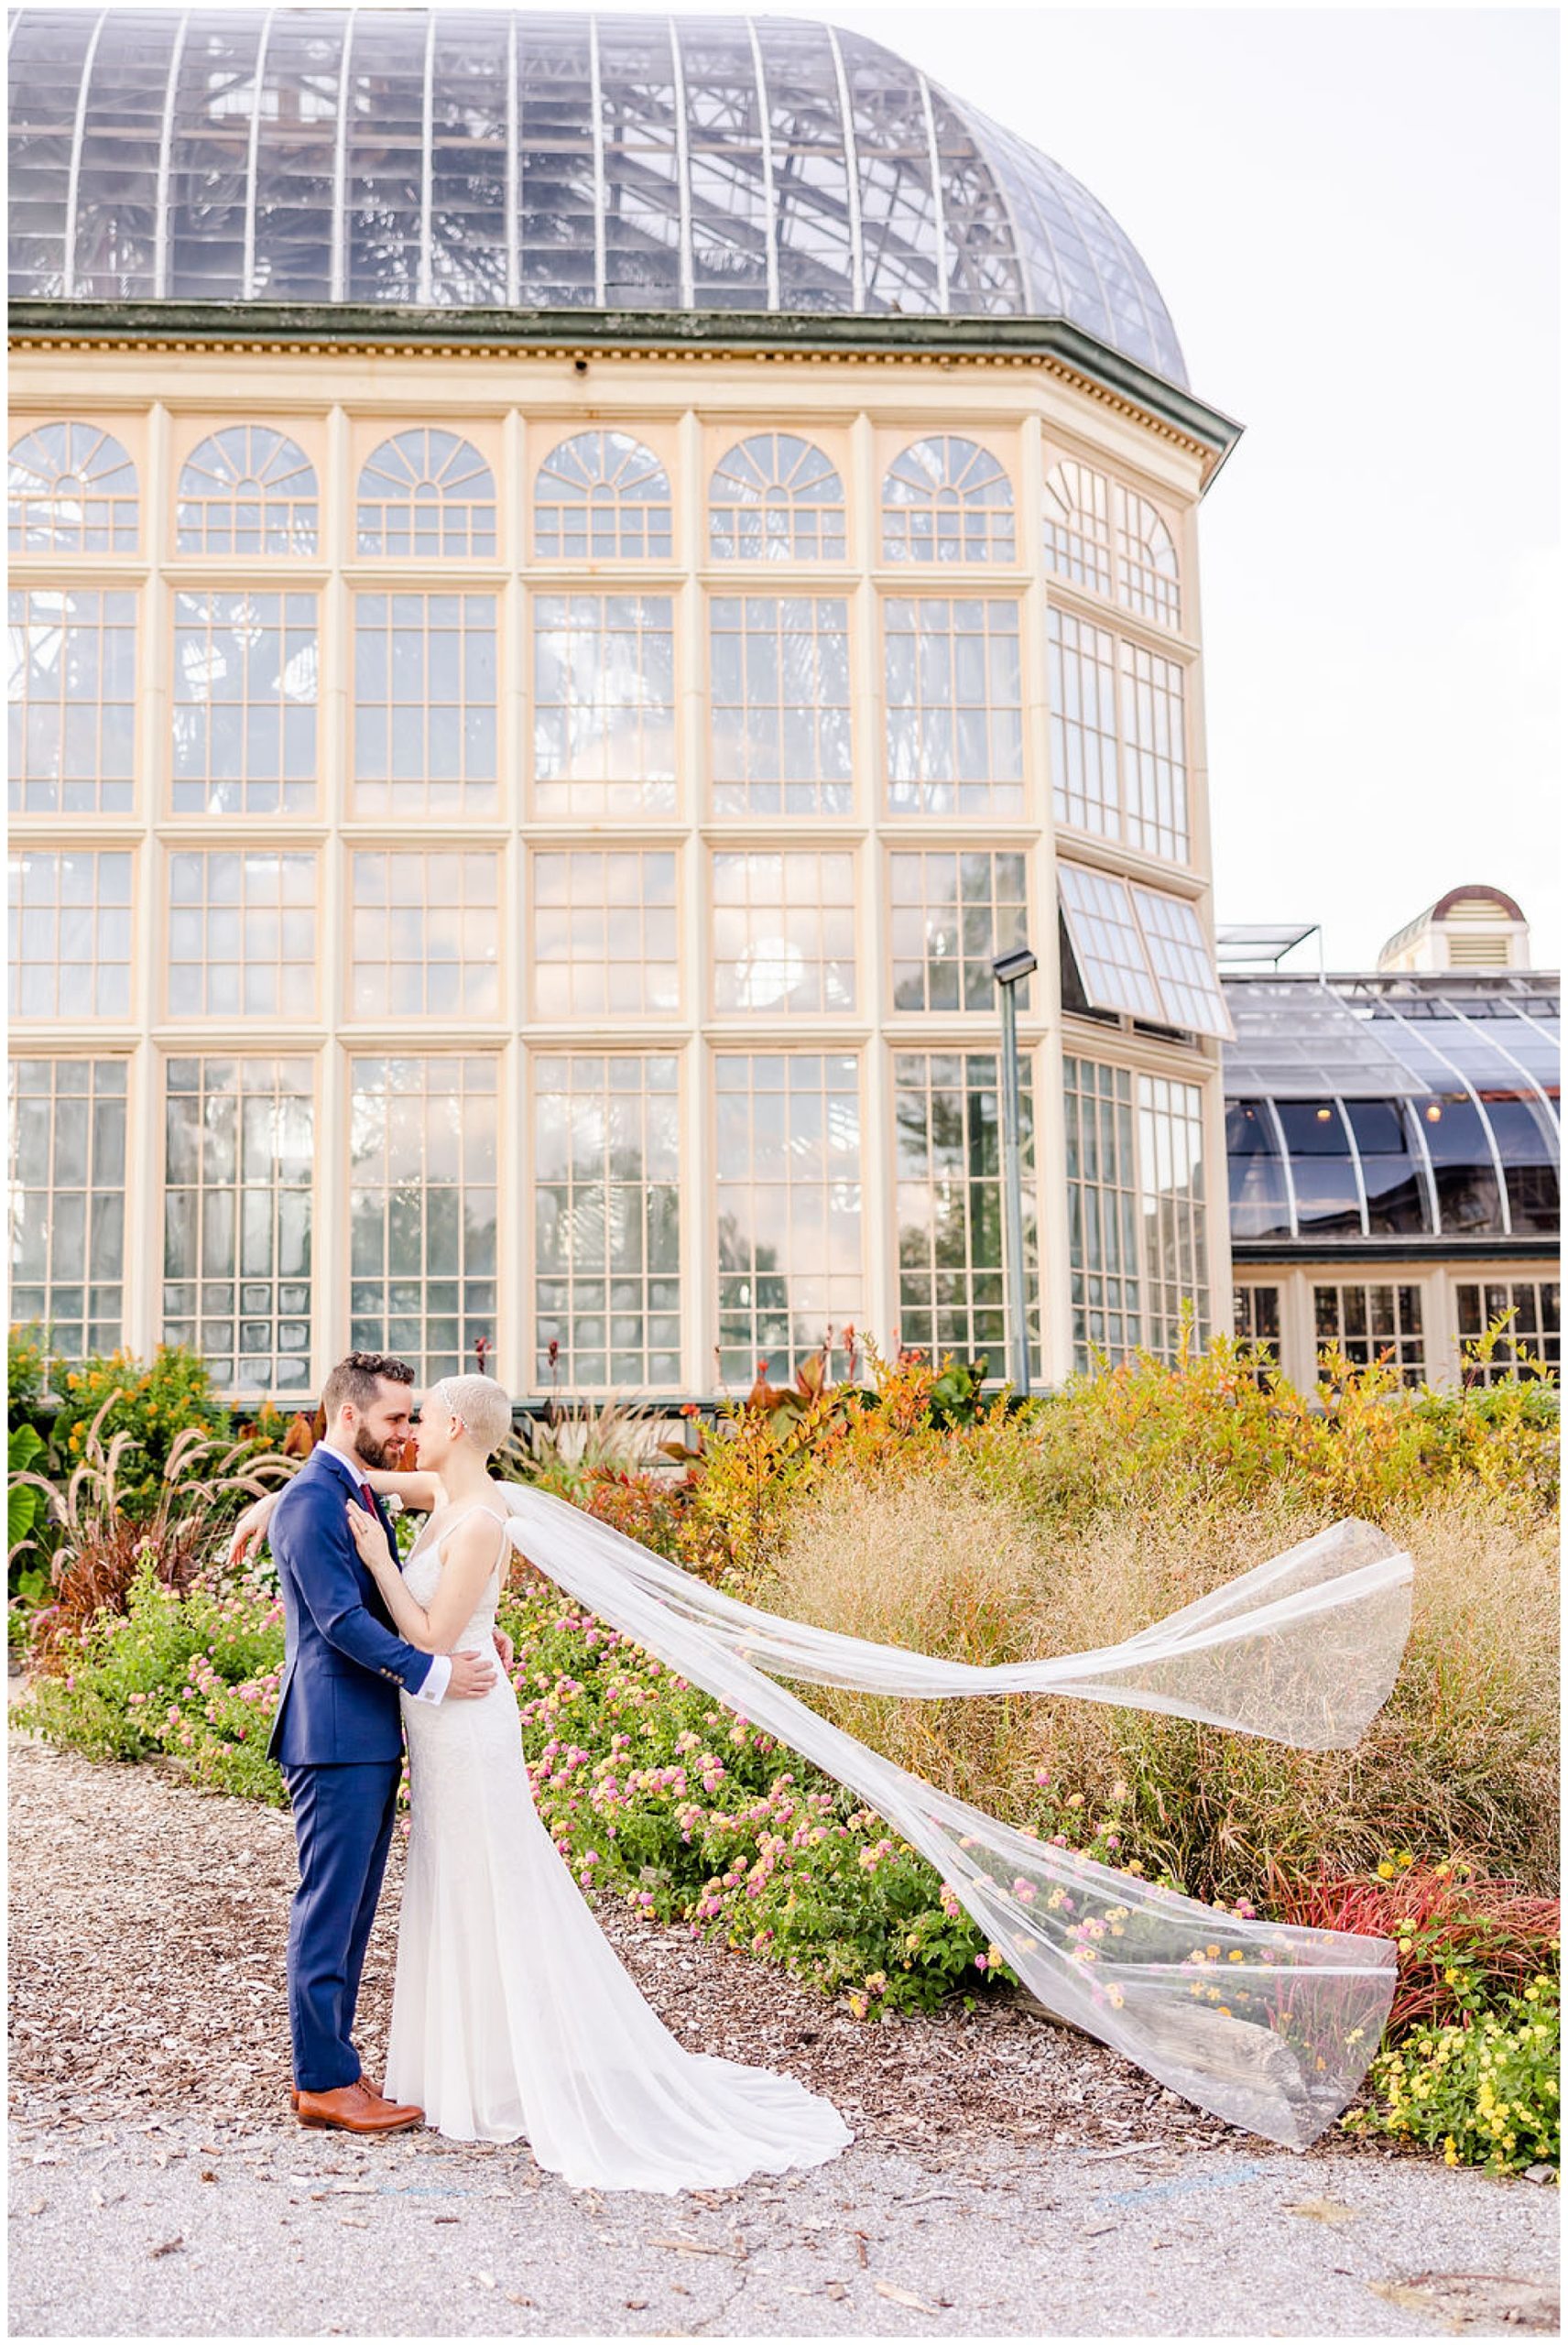 ethereal Rawlings Conservatory wedding, Baltimore wedding venues, Baltimore wedding photographer, Baltimore micro-wedding, Baltimore wedding photography, autumn wedding aesthetic, botanical gardens wedding, Baltimore botanical garden wedding, DC wedding photographer, Rachel E.H. Photography, bridal veil attached to dress, flowing wedding veil, couple looking at each other, Indochino navy suit